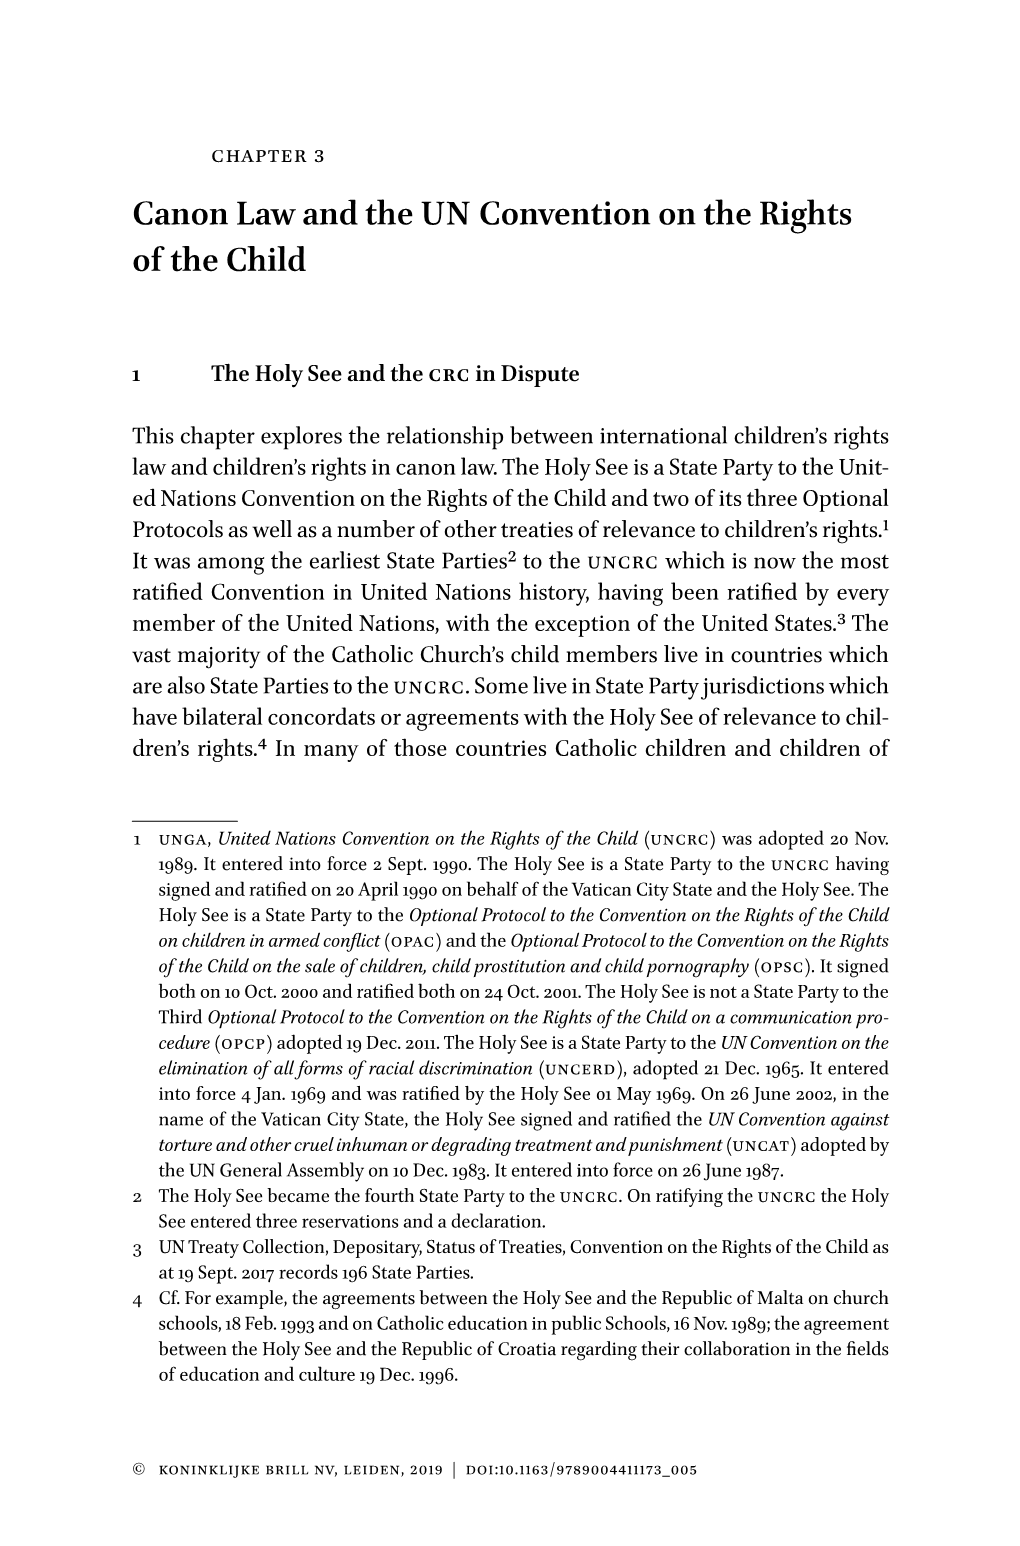 Canon Law and the UN Convention on the Rights of the Child